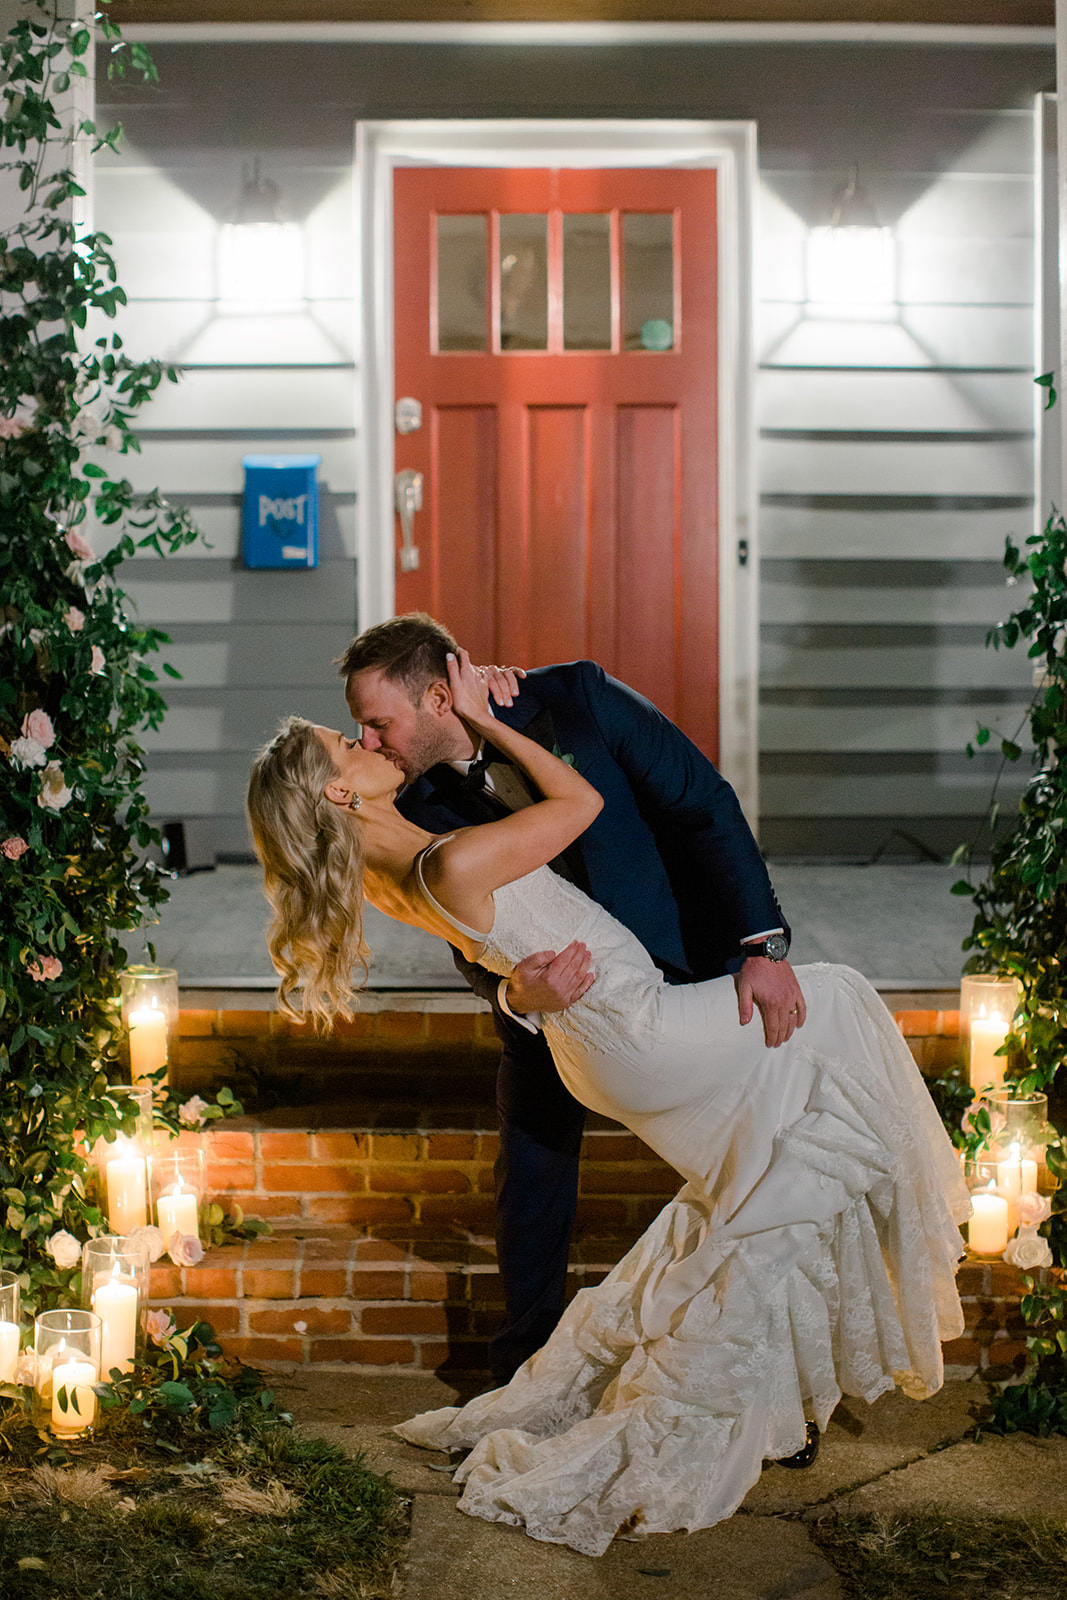 Dip kiss on stairs with greenery and candles